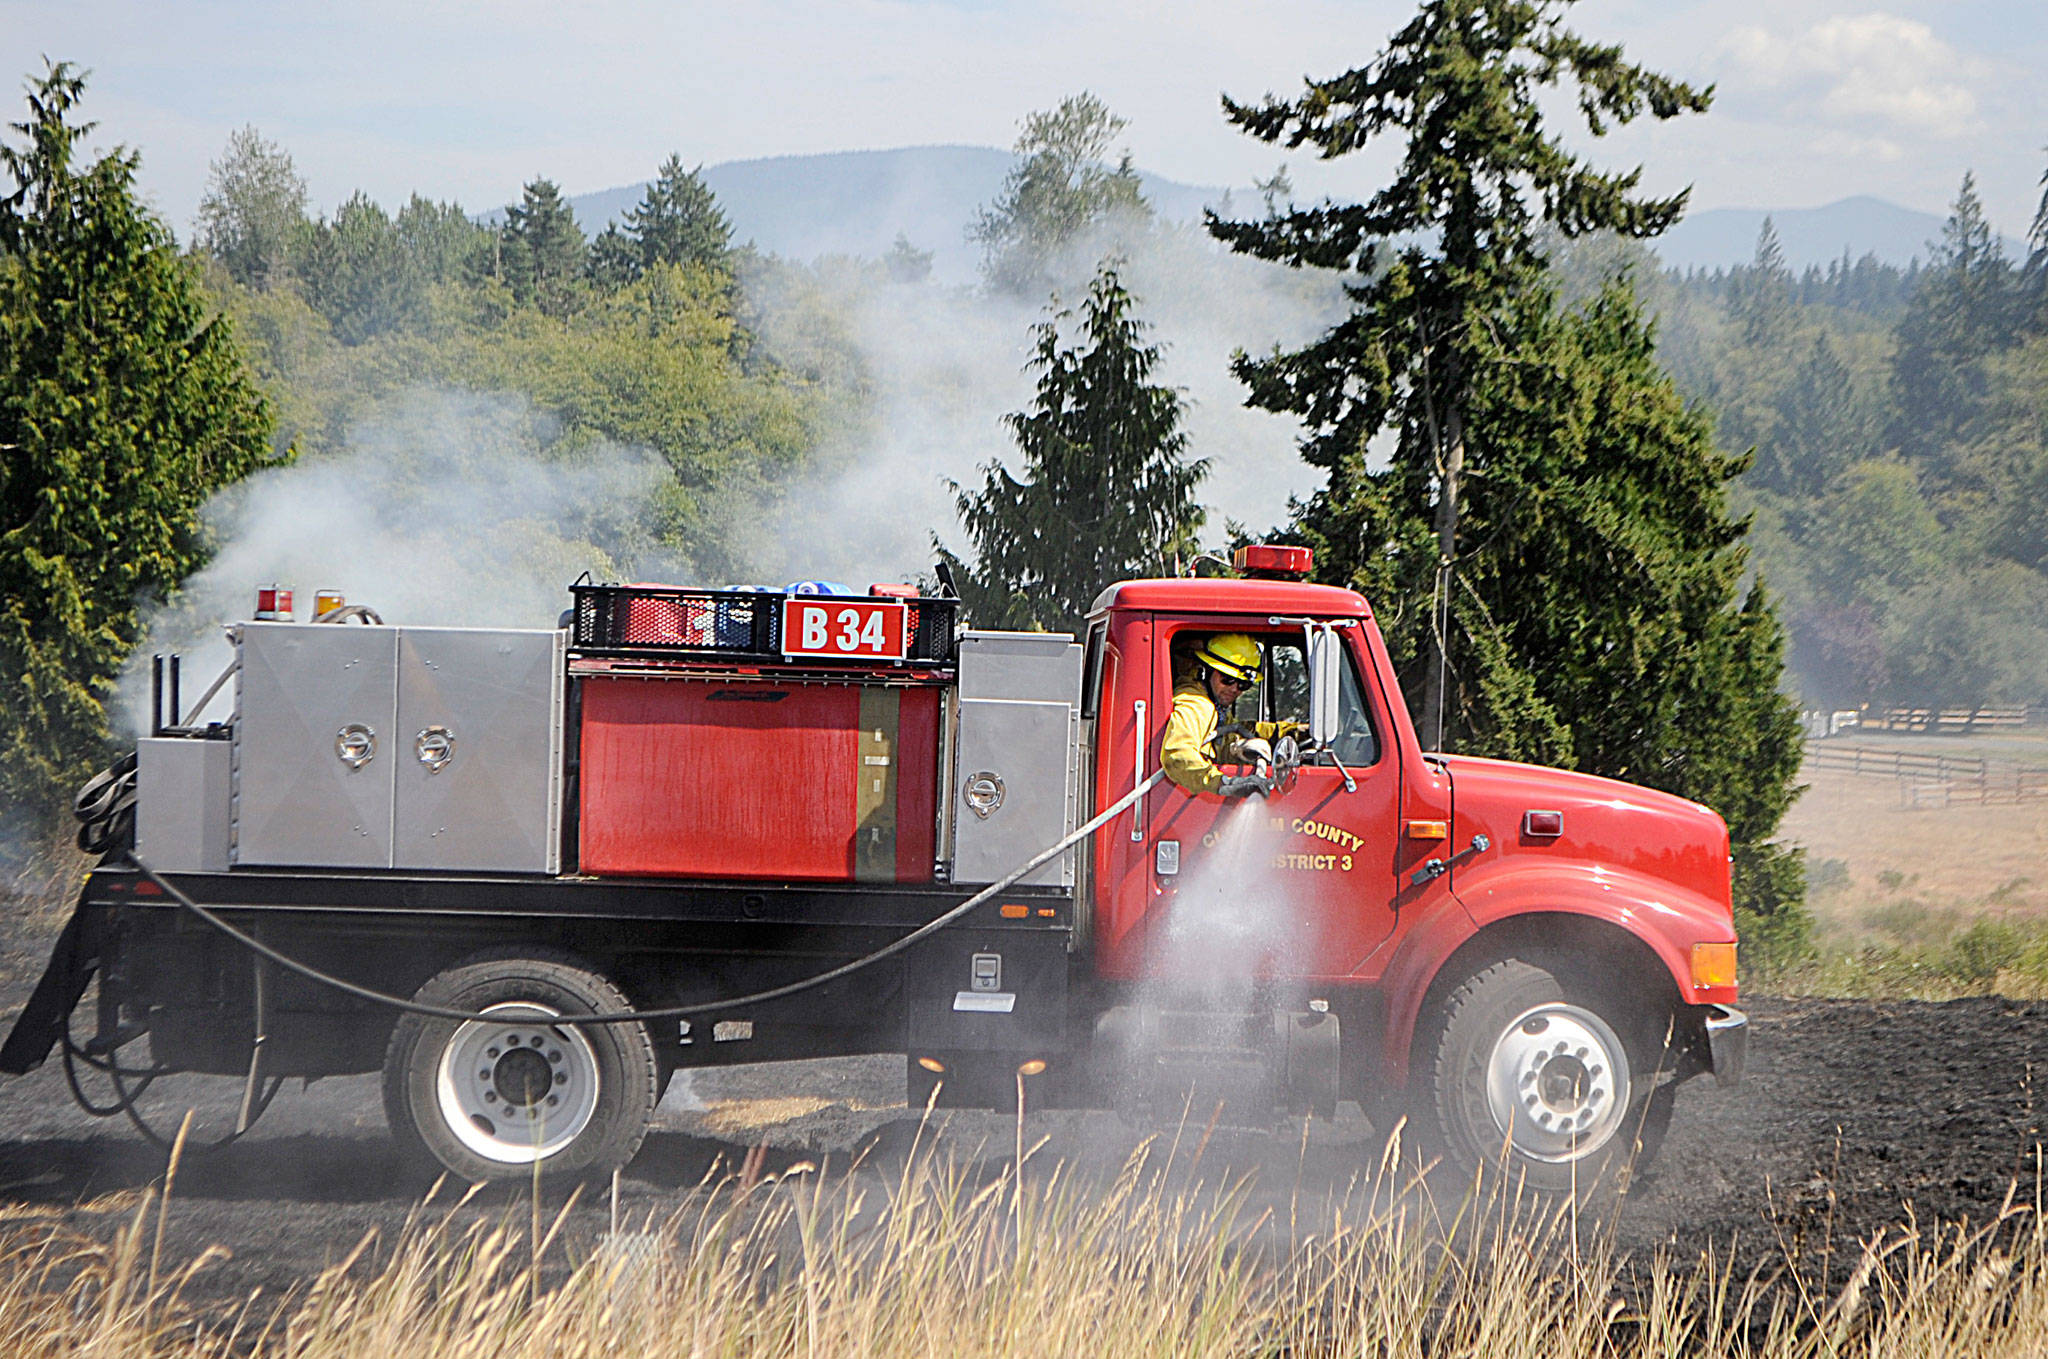 Clallam County Fire District 3 firefighters drive through looking to extinguish any flames on July 27 east of Sequim at a brush fire. Sequim Gazette photos by Matthew Nash